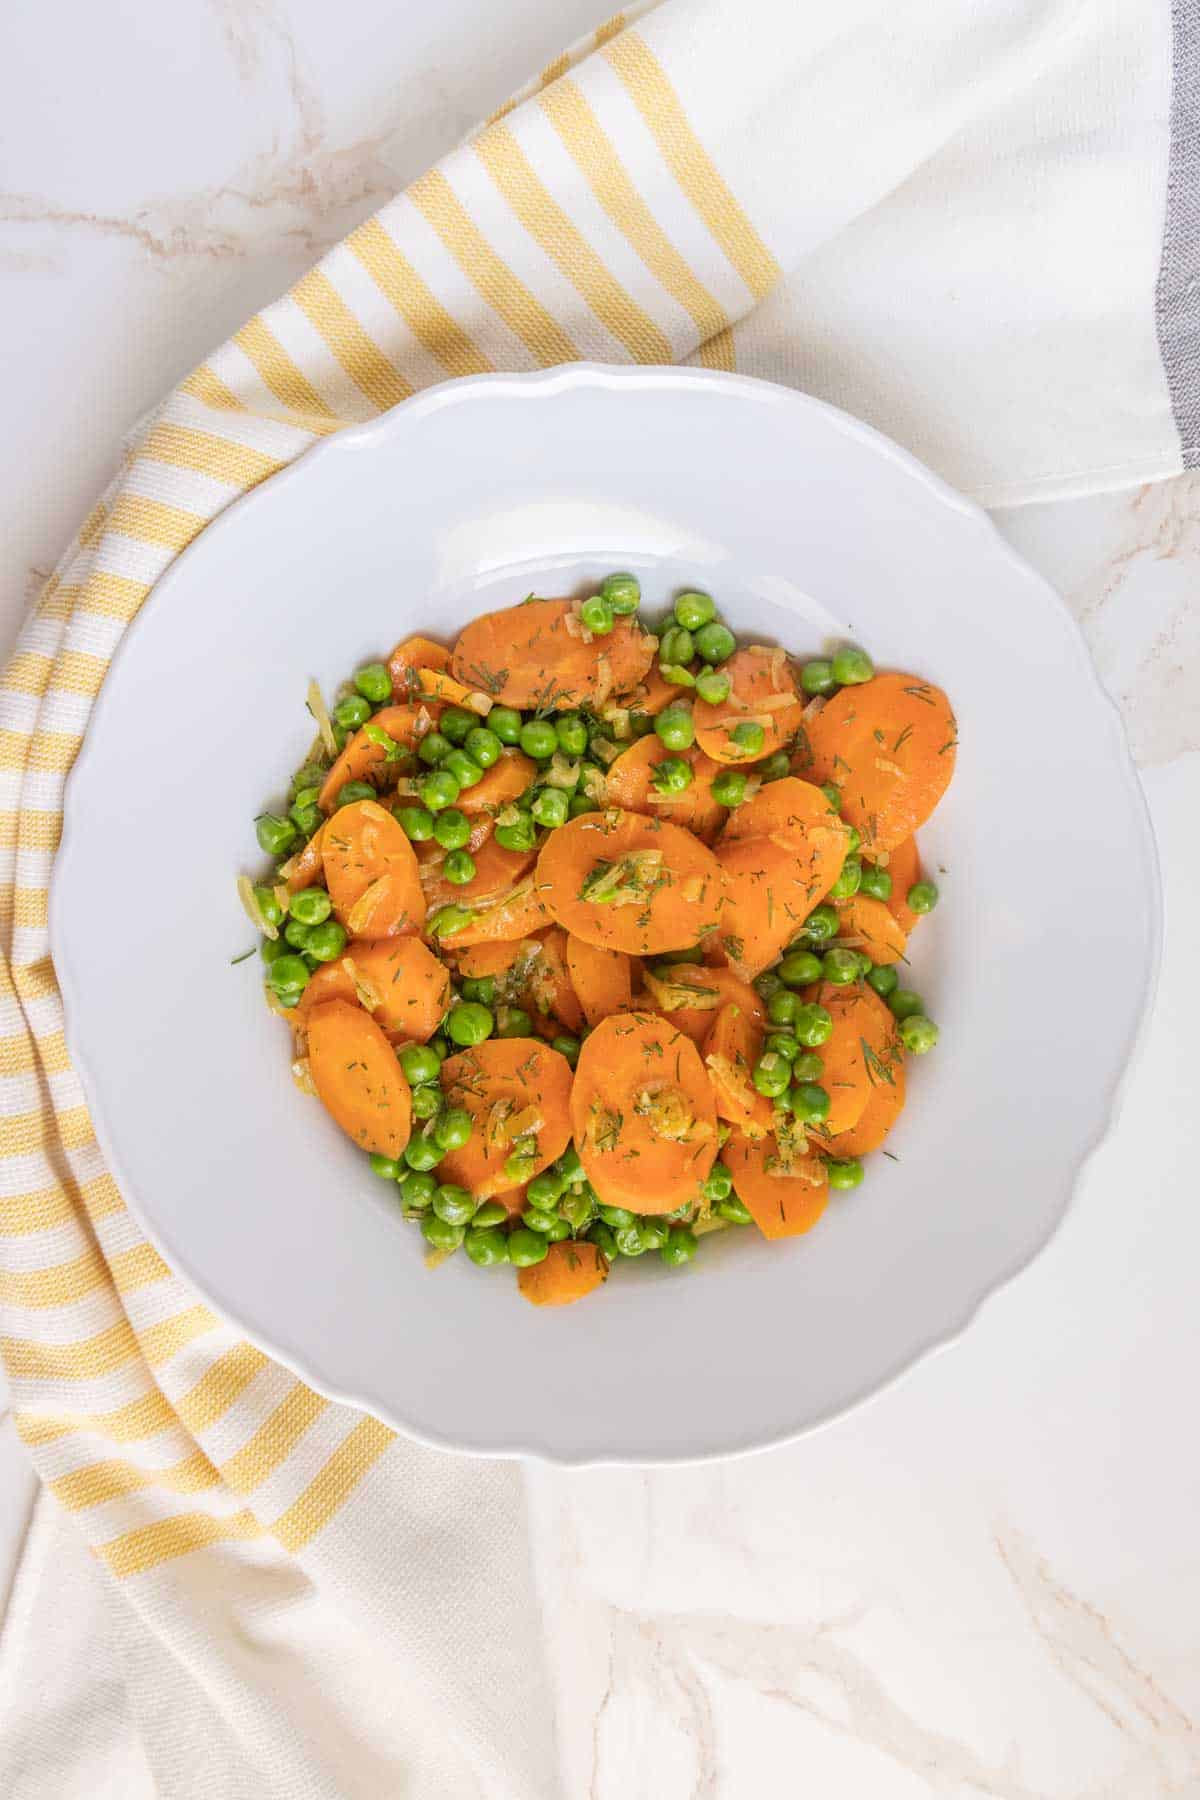 A plate of sliced carrots and green peas on a table with a striped napkin.